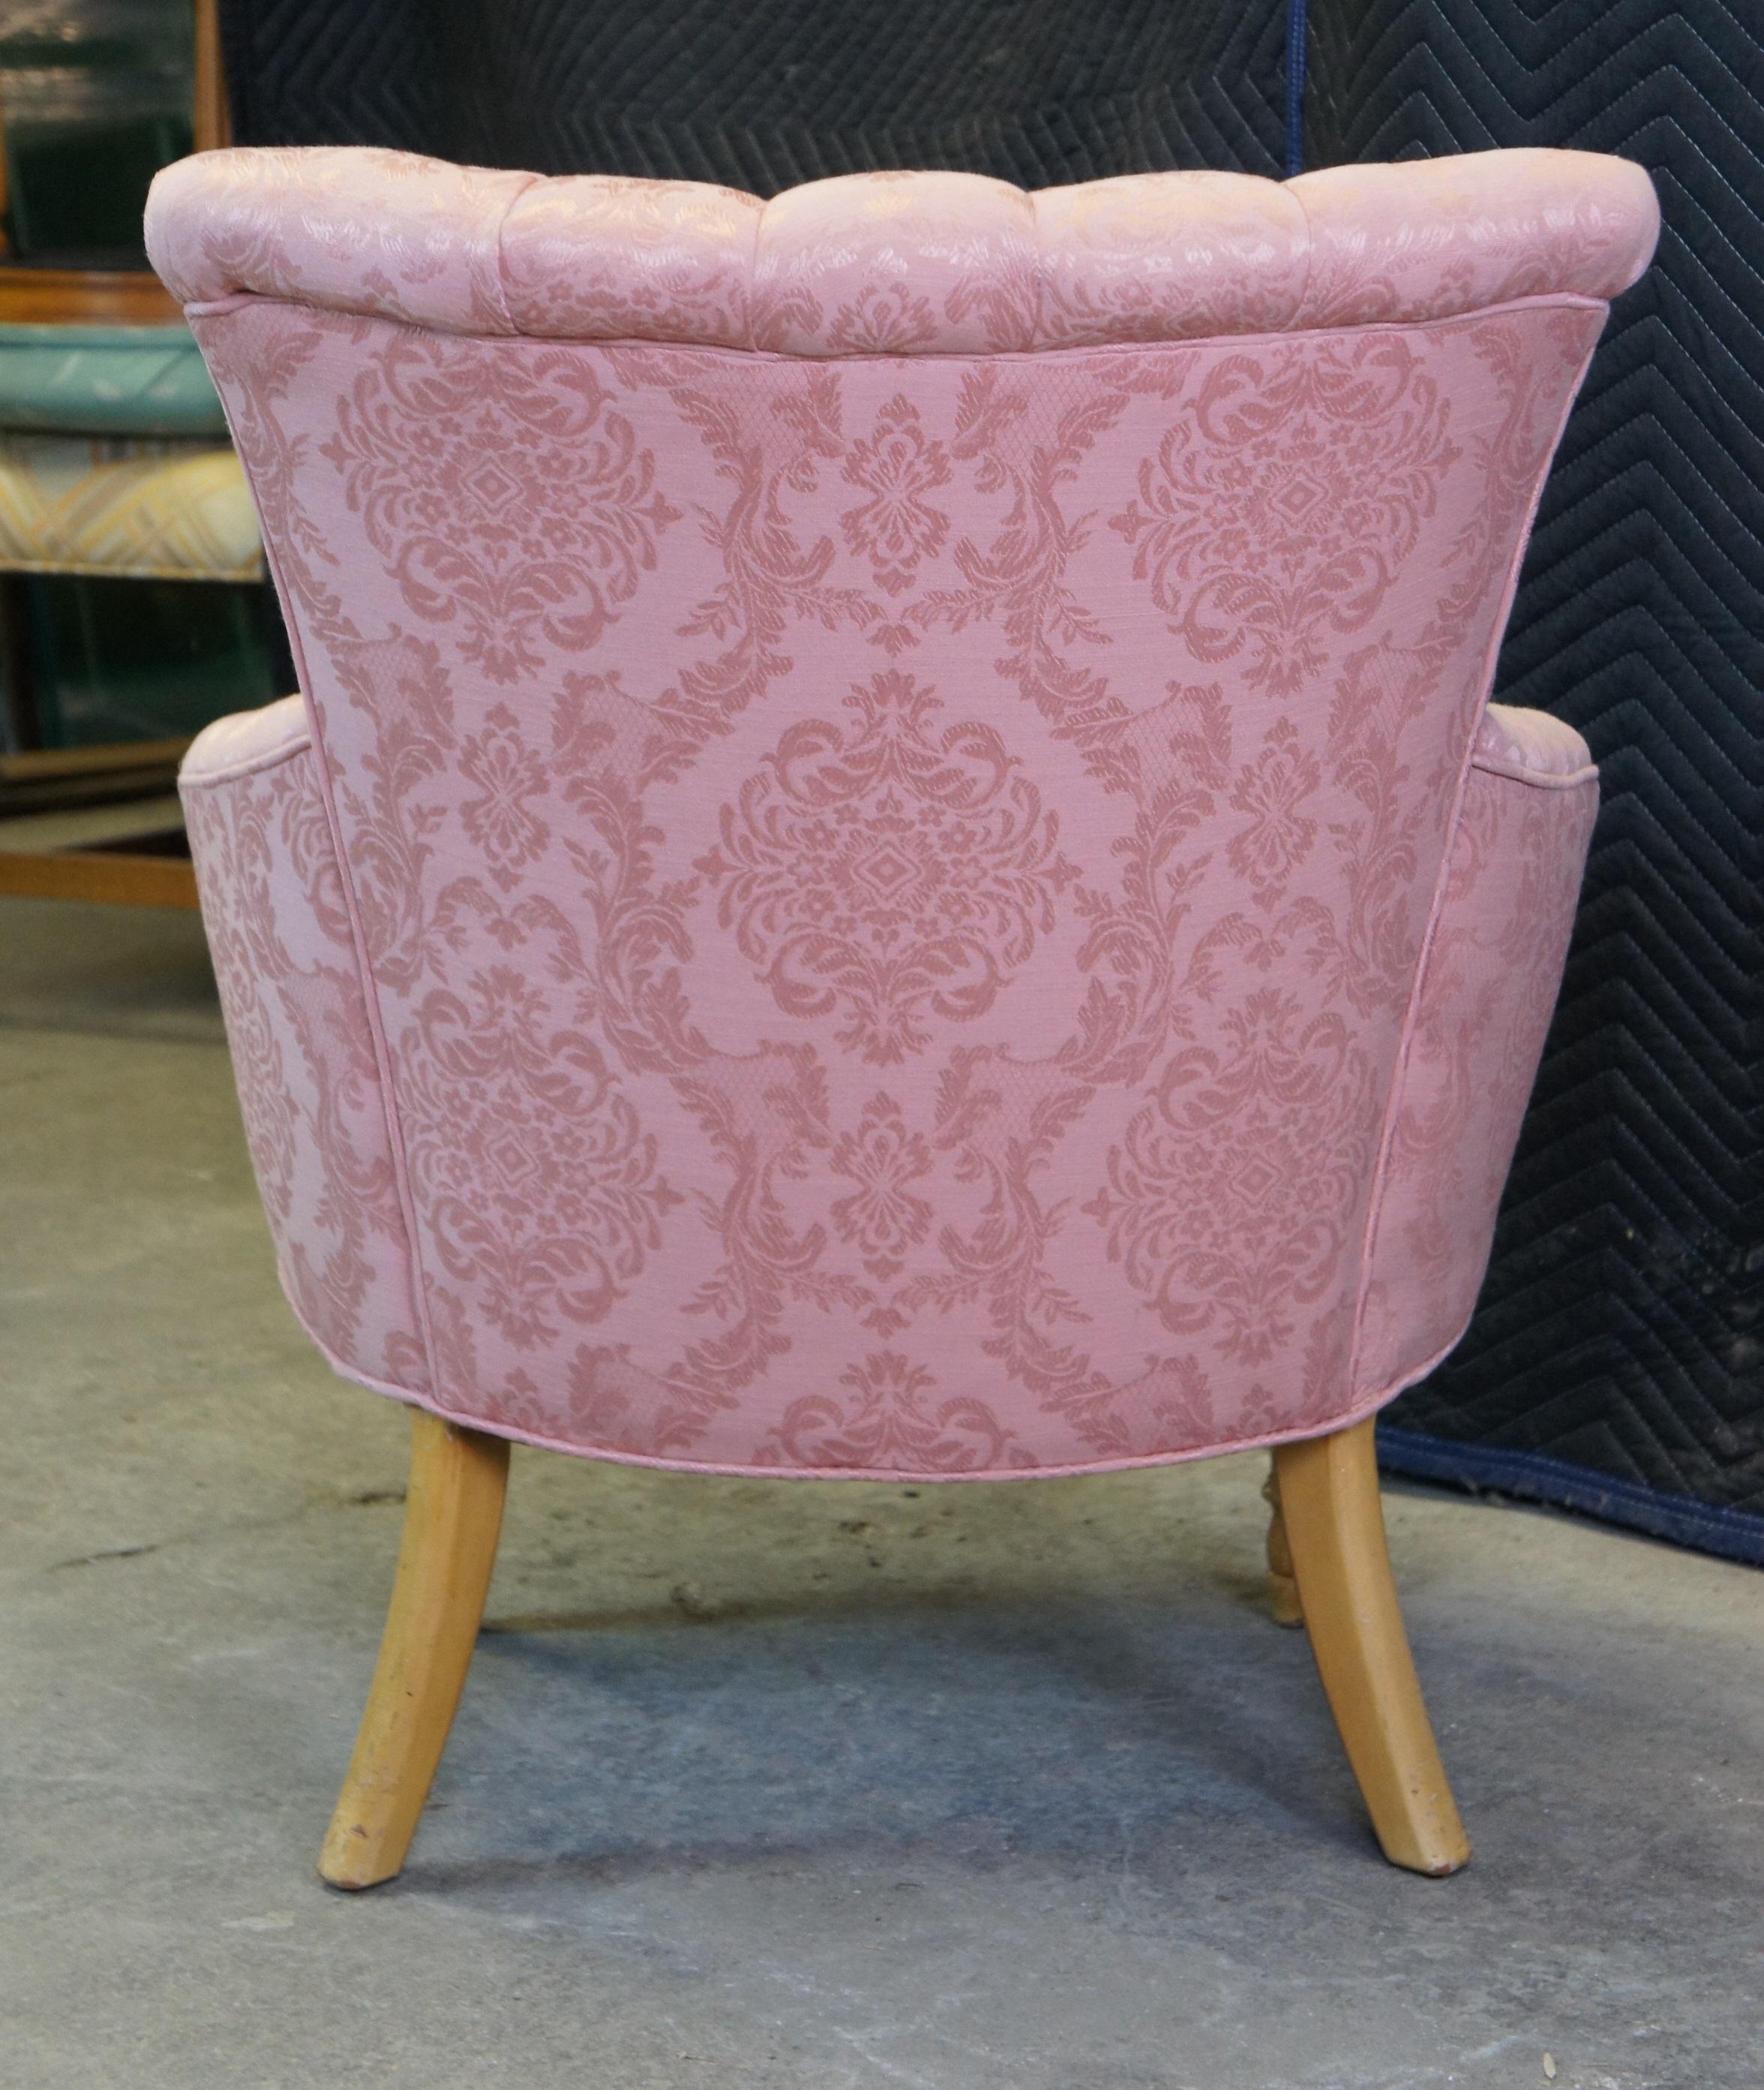 Upholstery Antique Robert W Irwin French Provincial Channel Back Vanity Chair Pink Brocade